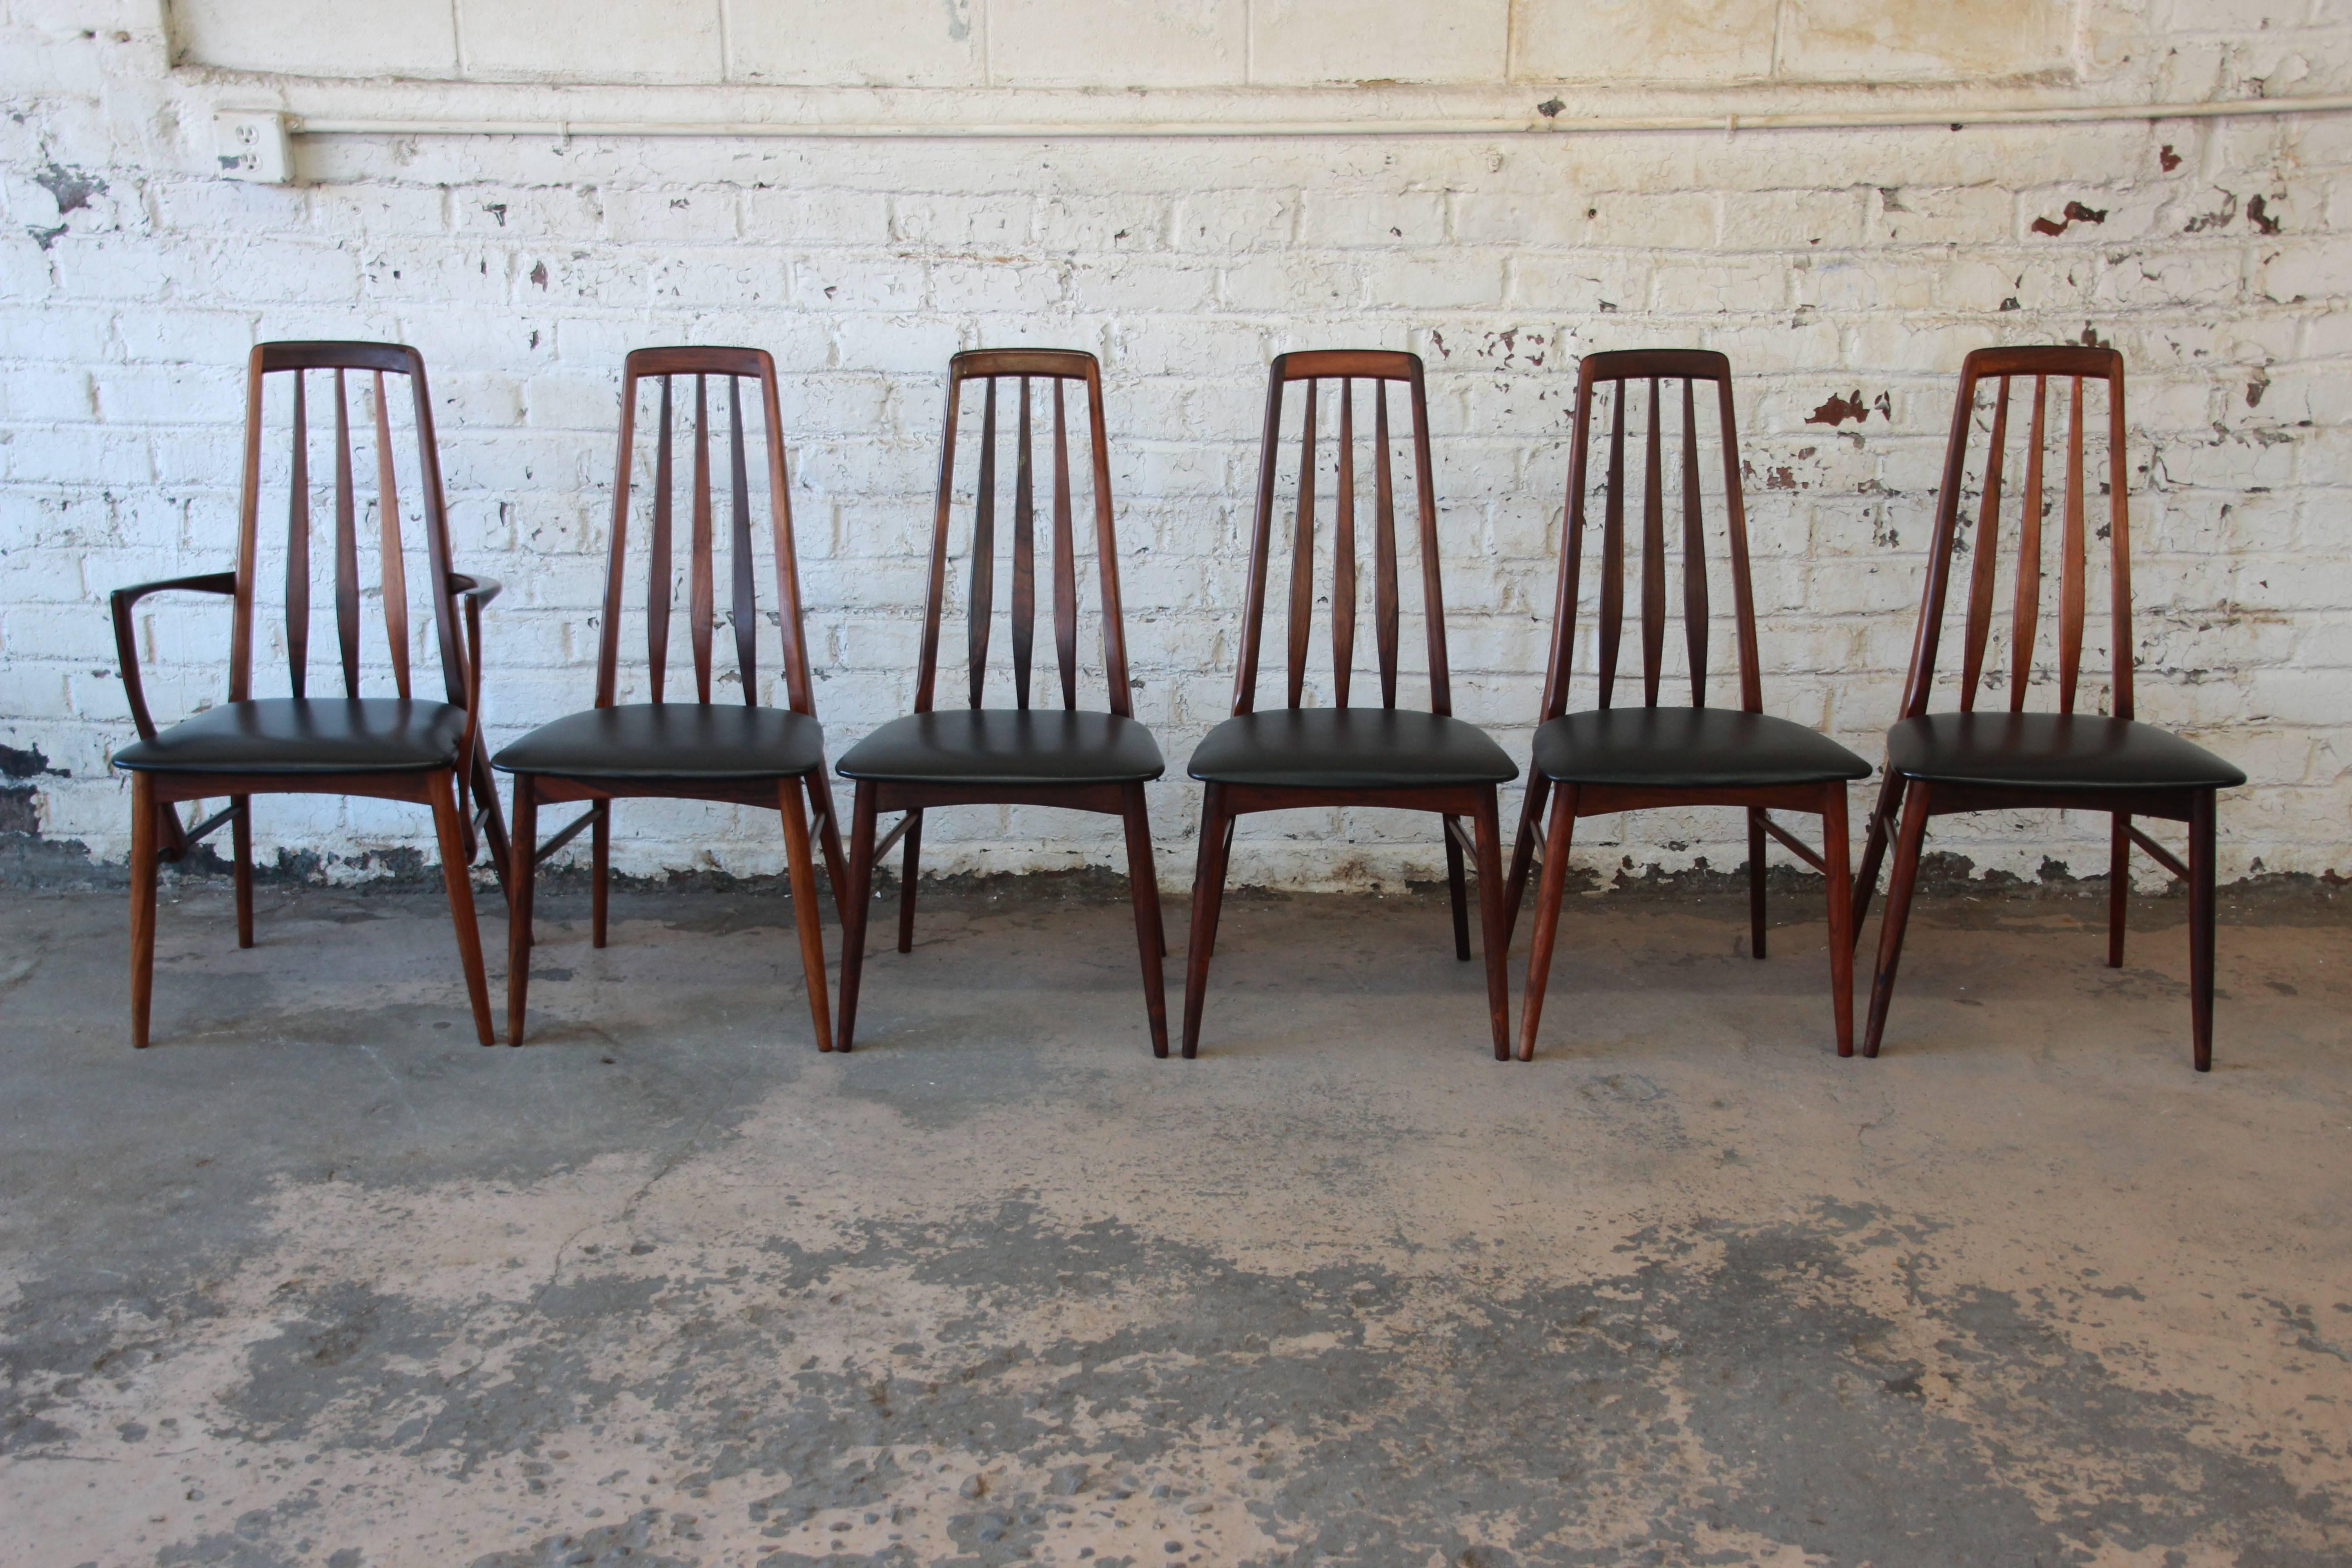 A gorgeous set of six rosewood 'Eva' dining chairs designed by Niels Koefoed for Koefoeds Hornslet, circa 1964. The chairs feature stunning solid rosewood frames with beautiful wood grain and sleek and stylish Mid-Century Danish Modern design. They